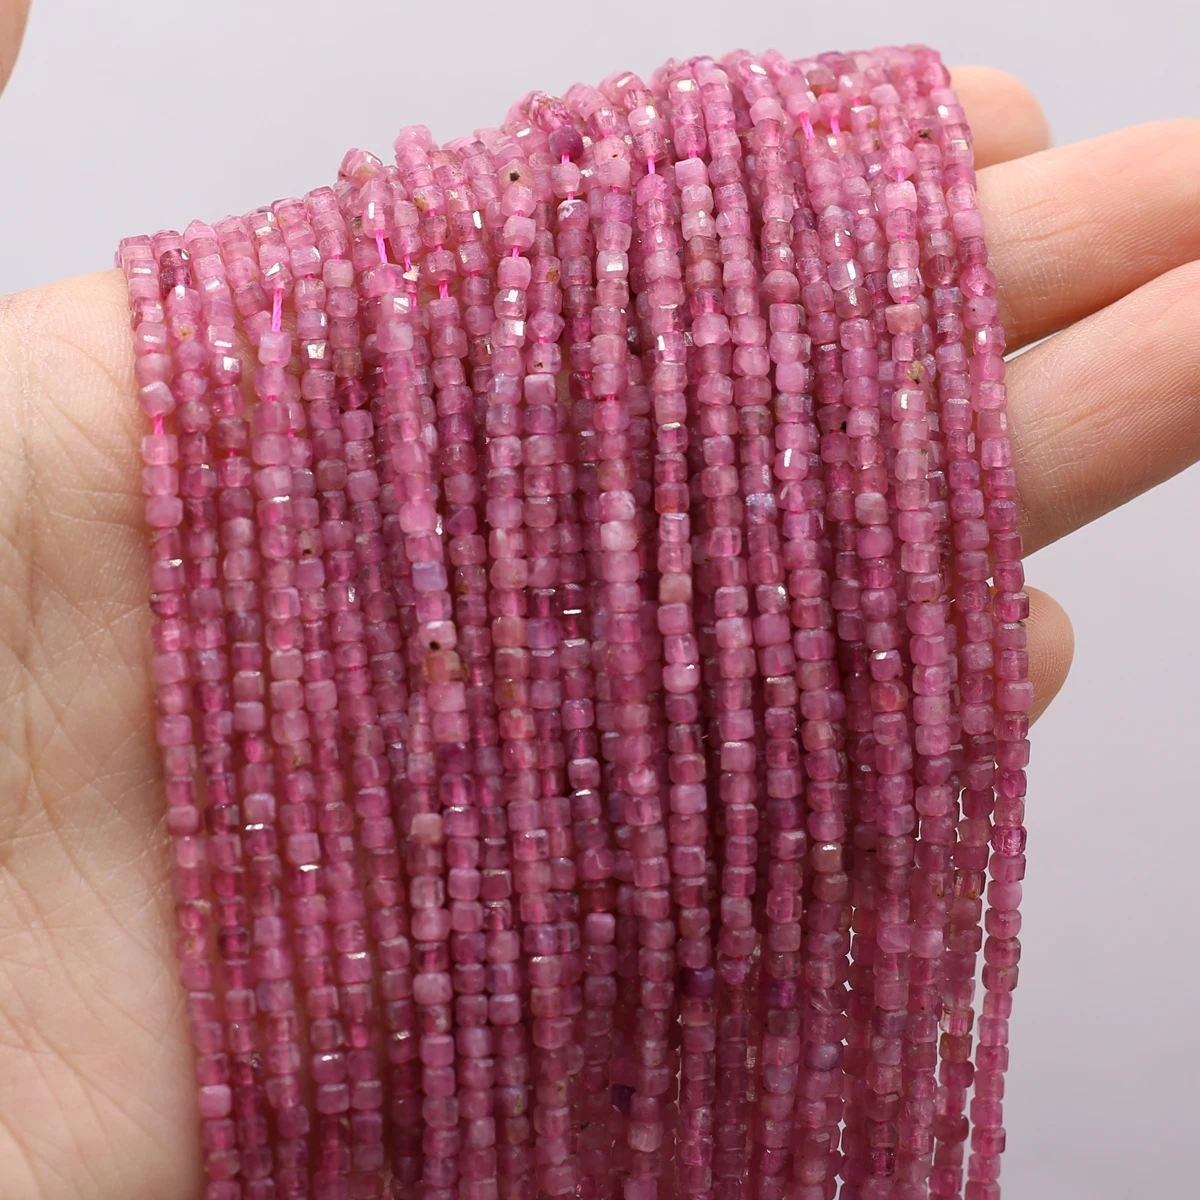 

2mm Natural Pink Tourmaline Stone Faceted Beads Bead Handmade Loose Spacer Beads For Jewelry Making Charms Bracelets For Women